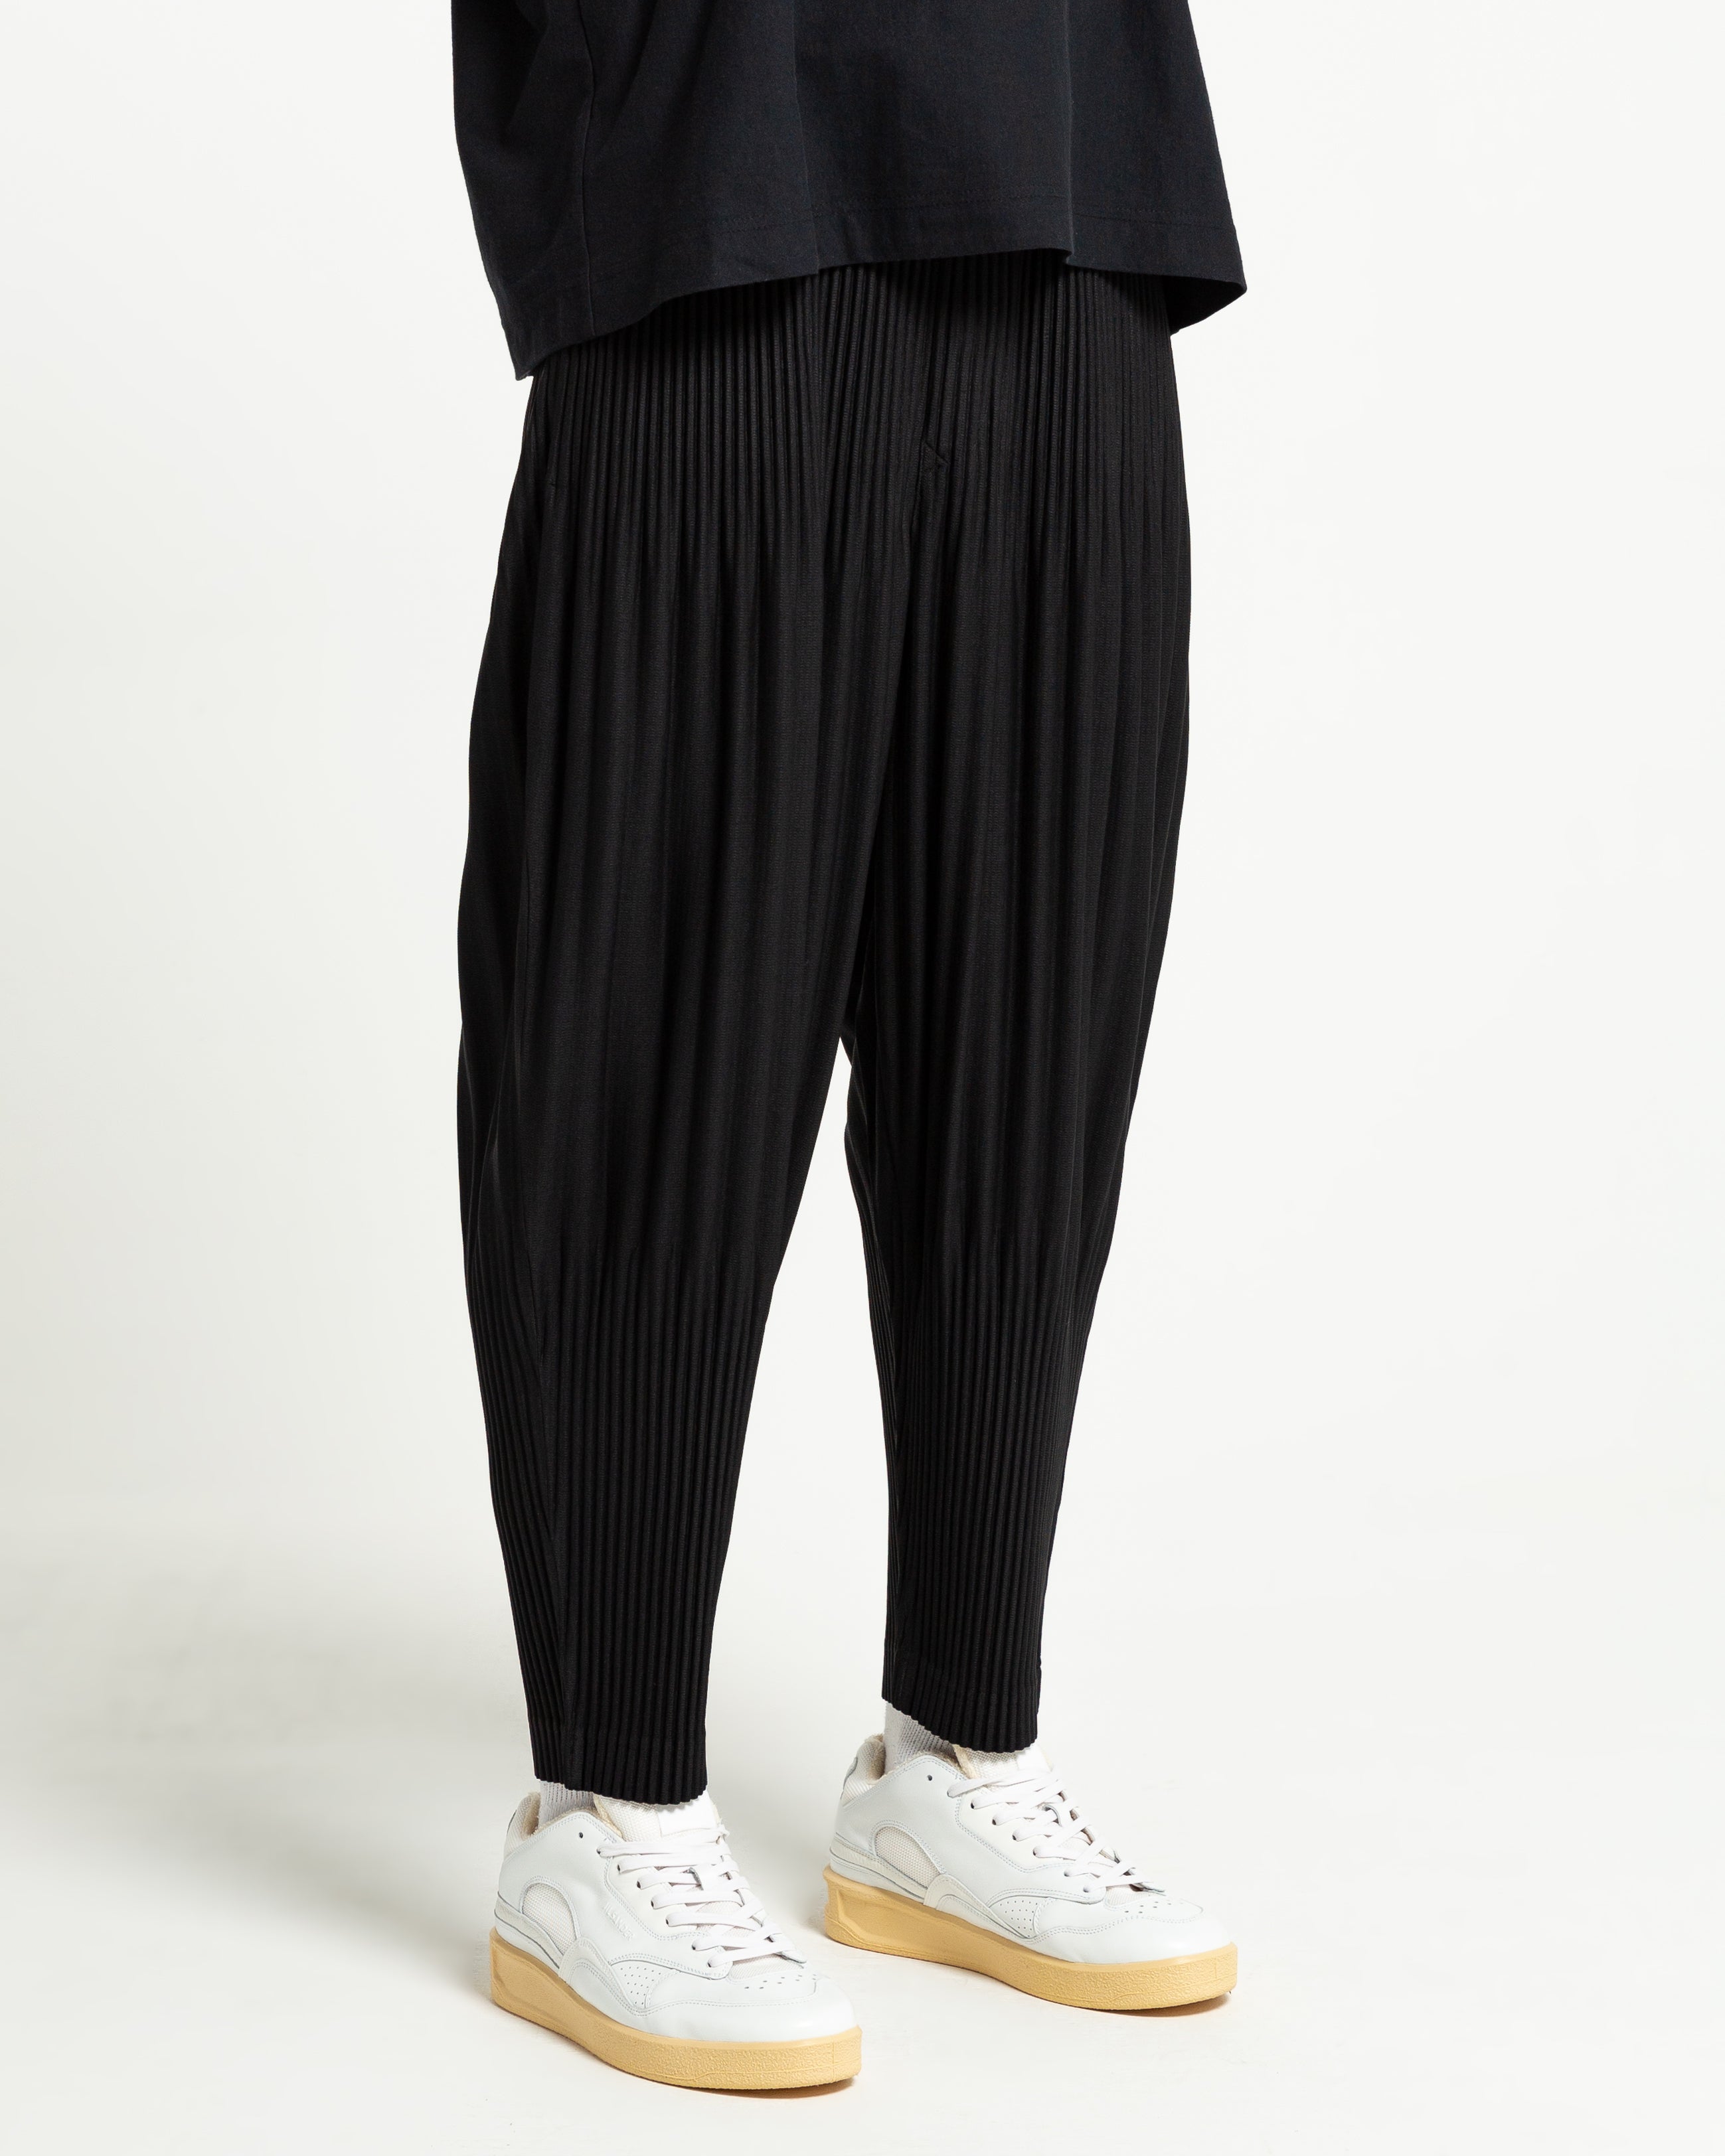 Homme Plissé Issey Miyake Tapered Pleated Pants in Black